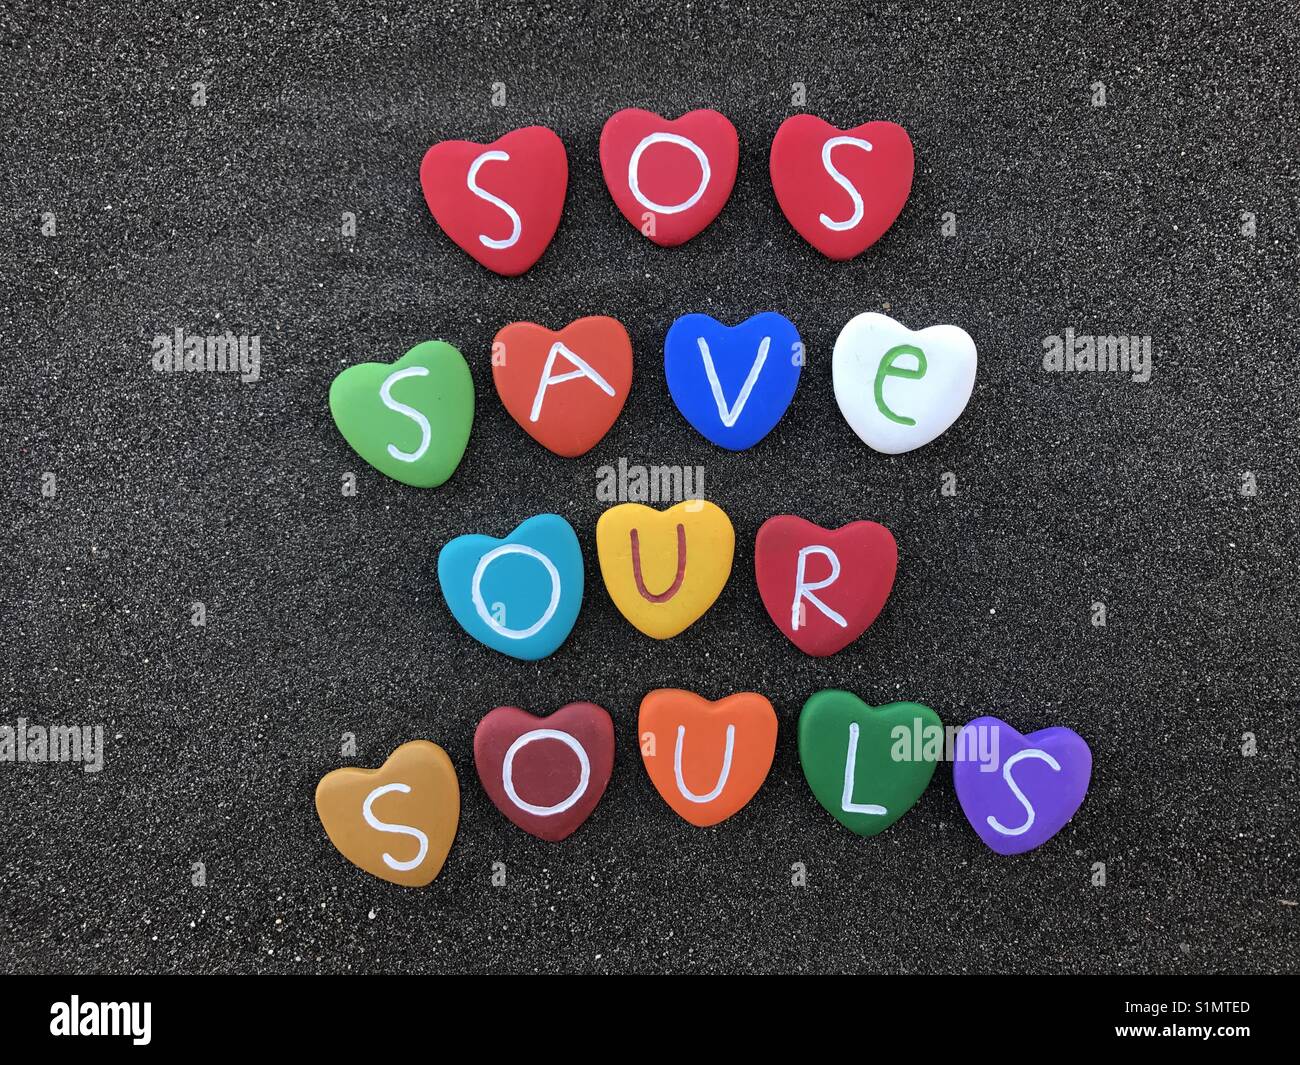 SOS, save our souls, international Morse code distress signal with colored heart stones over black volcanic sand Stock Photo